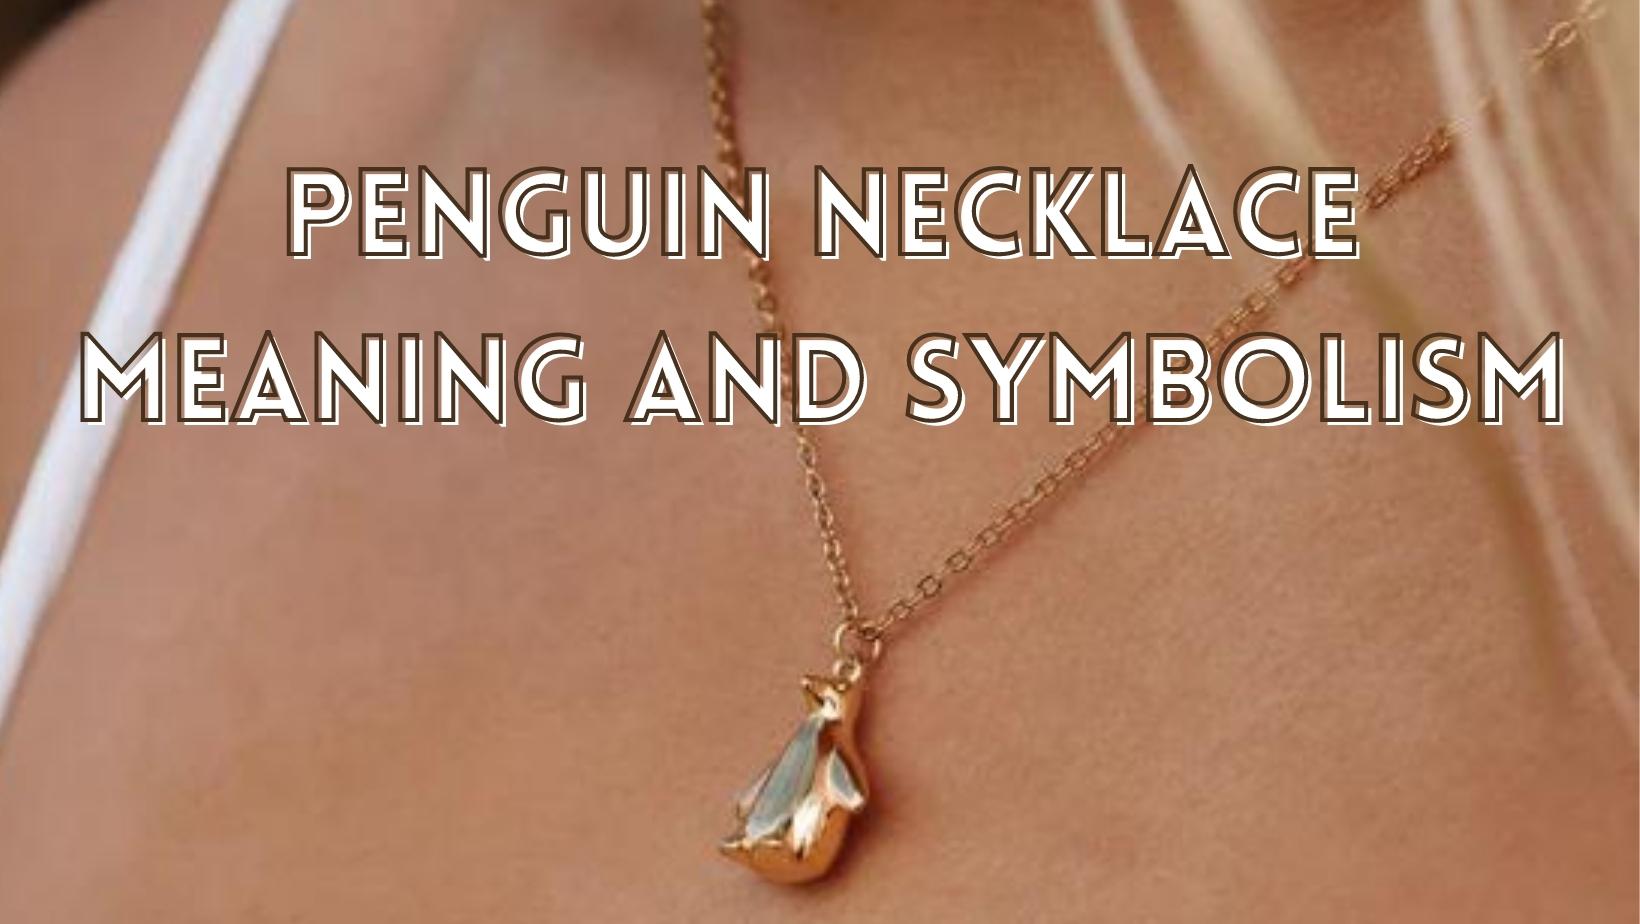 Penguin necklace meaning and symbolism